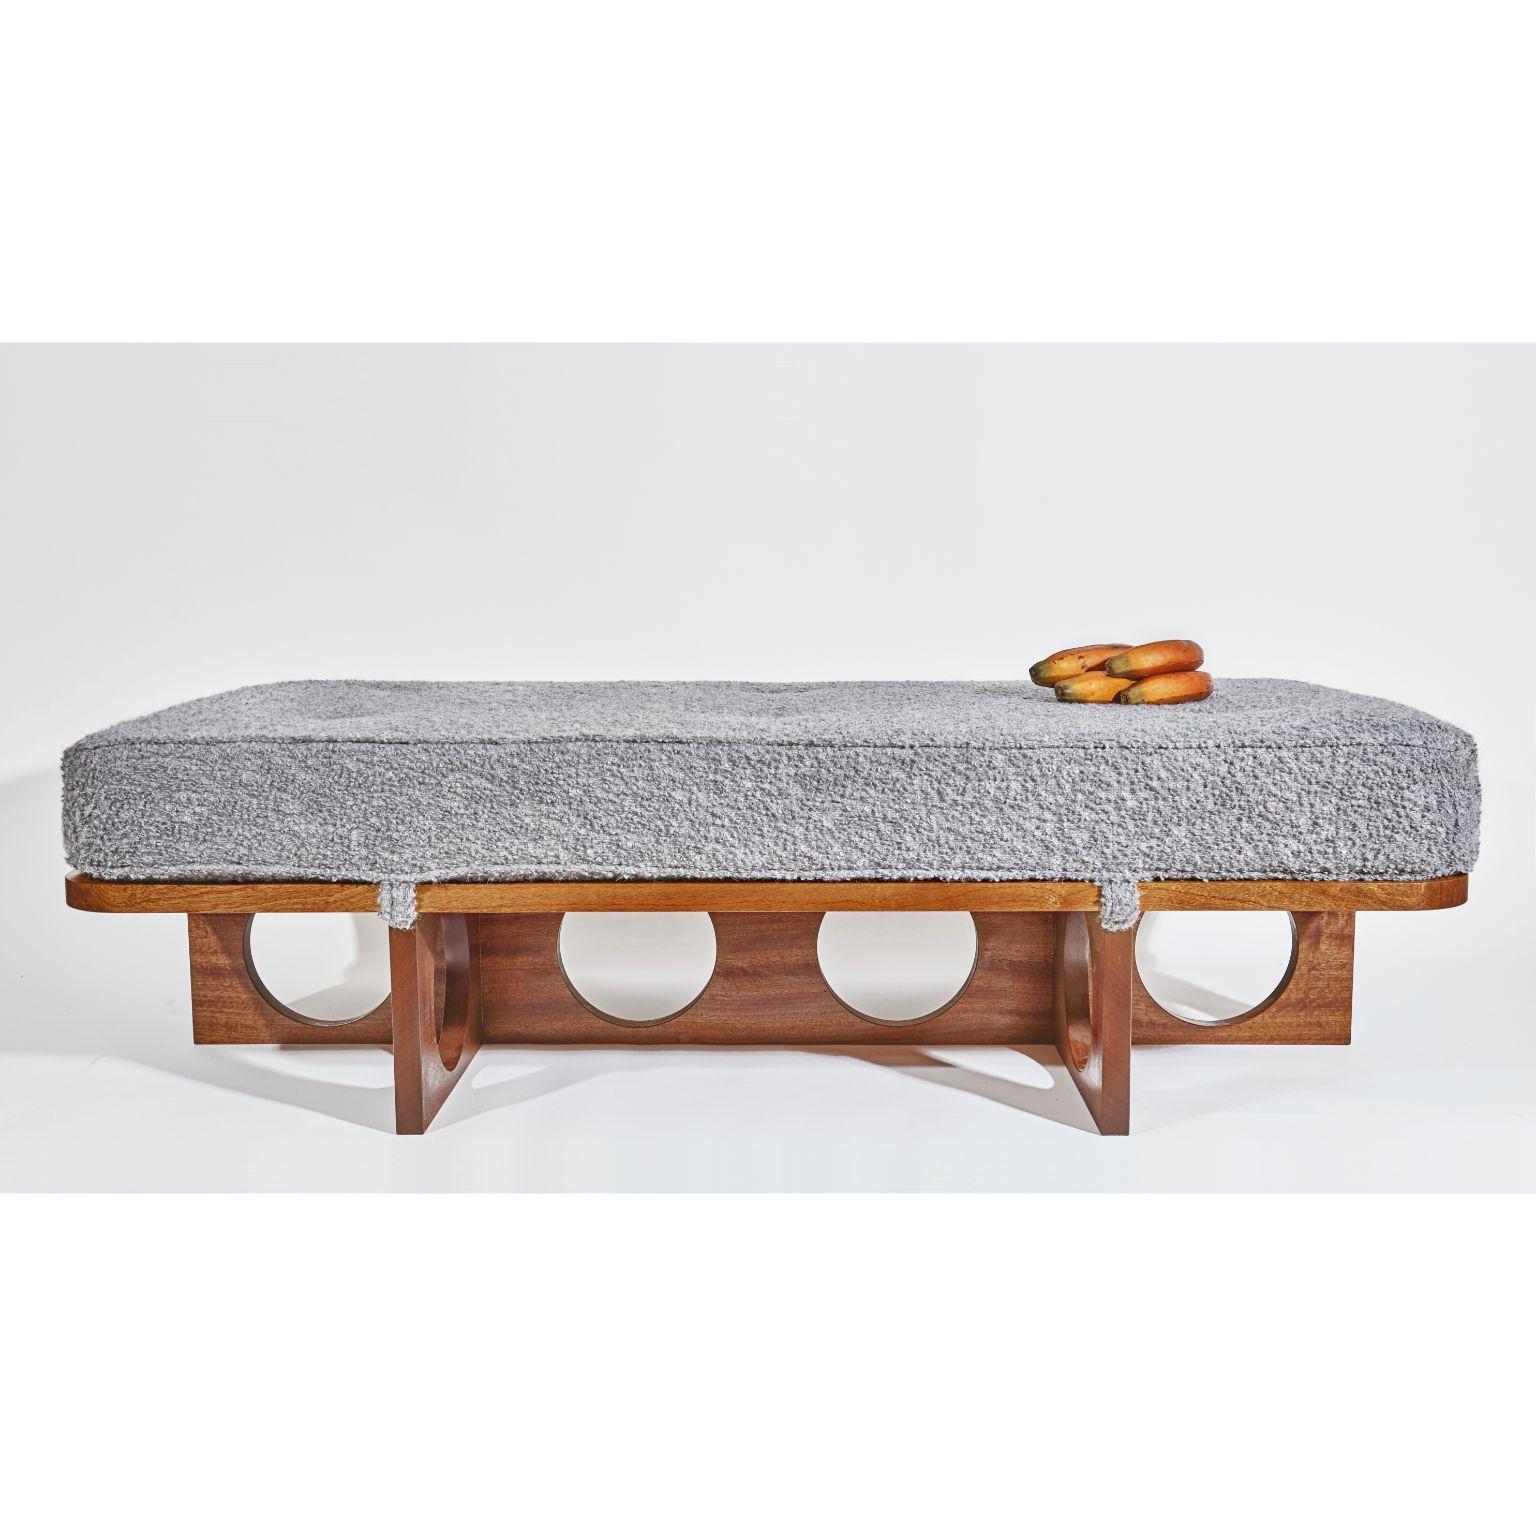 Brazilian ottoman by Tino Seubert
Dimensions: D 140 x W 70 x H 38 cm.
Materials: Oiled Sapele wood, Alpaca bouclé upholstered mattress.

Tino Seubert
When he first made his now signature wicker and aluminium stools and benches in 2018 for a